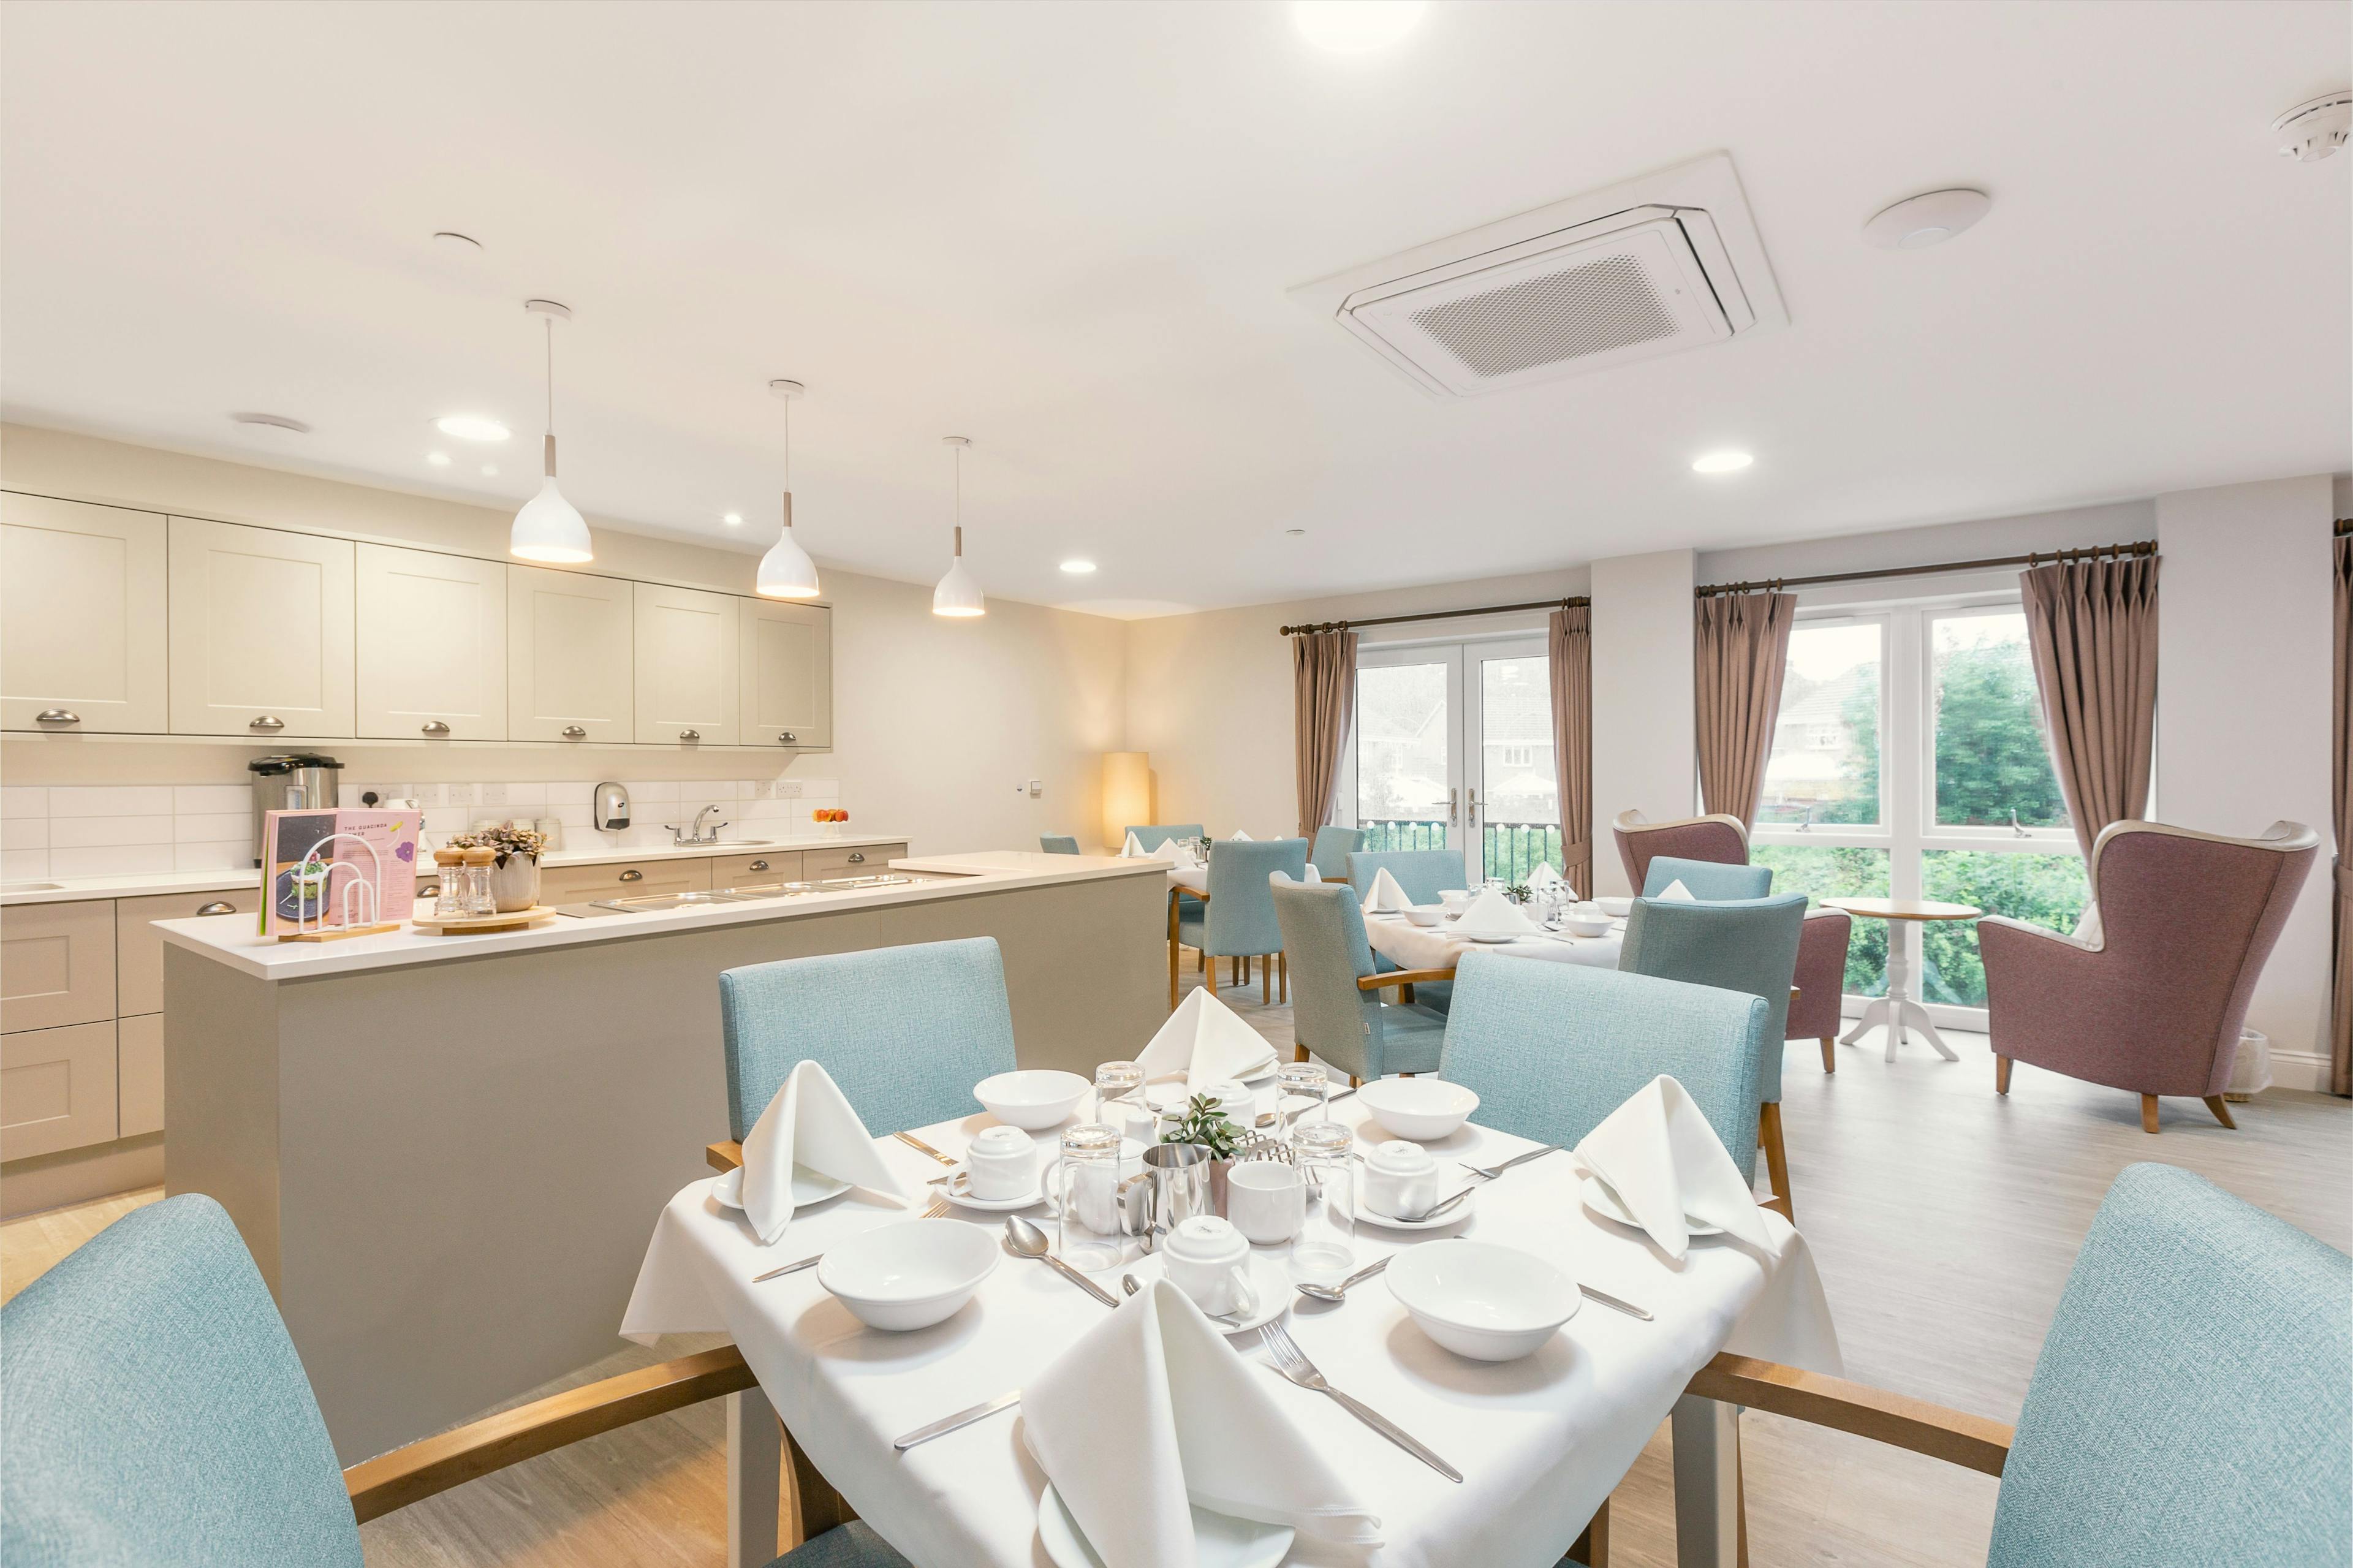 Dining room of The Oaks care home in Birmingham, West Midlands